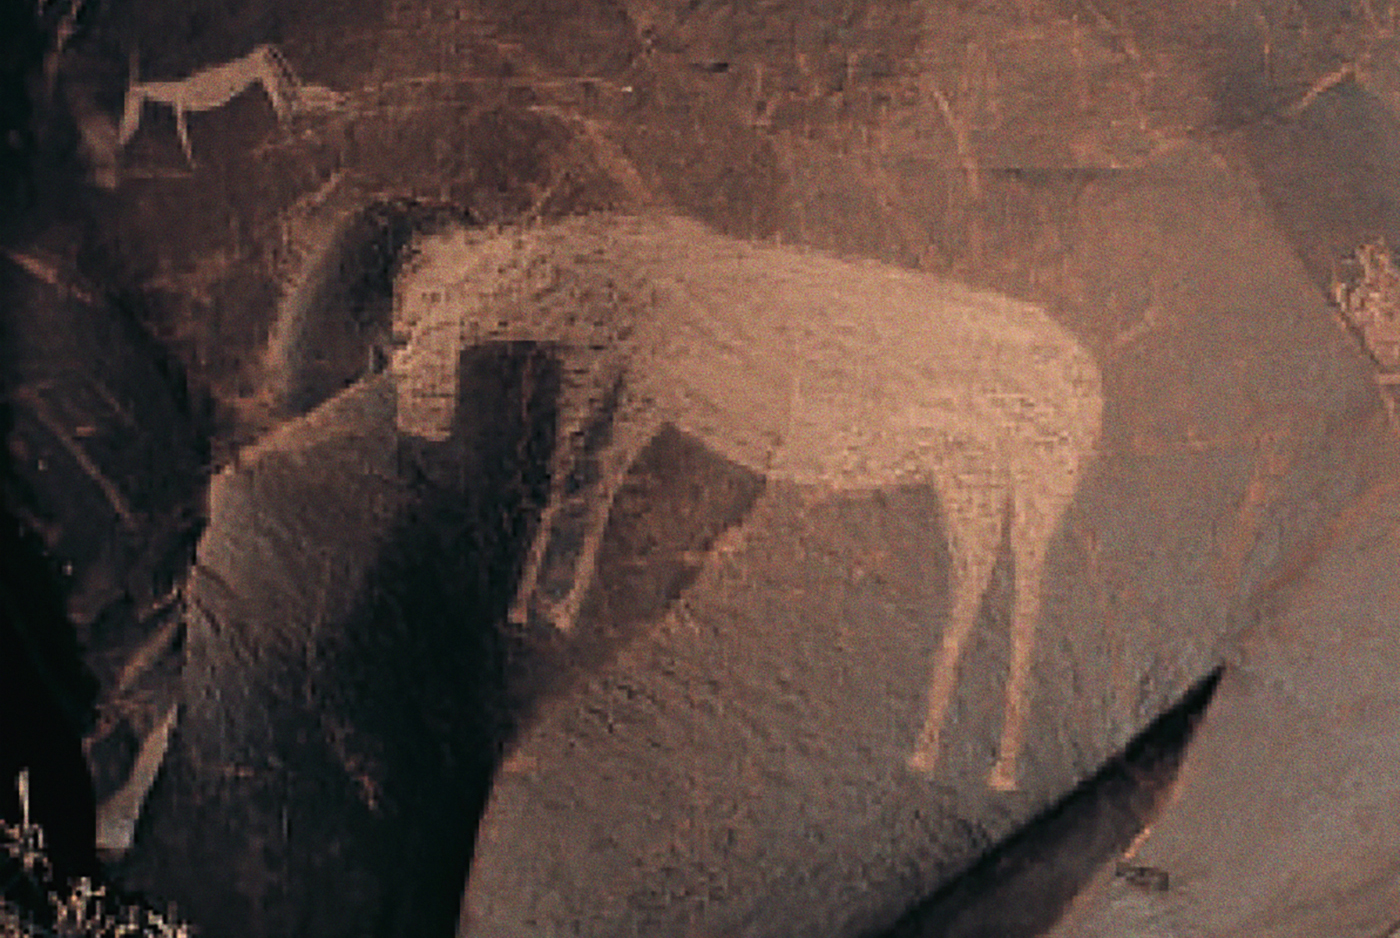 Engraving of an equid, most likely a zebra, on Springbokoog near Olifantvlei